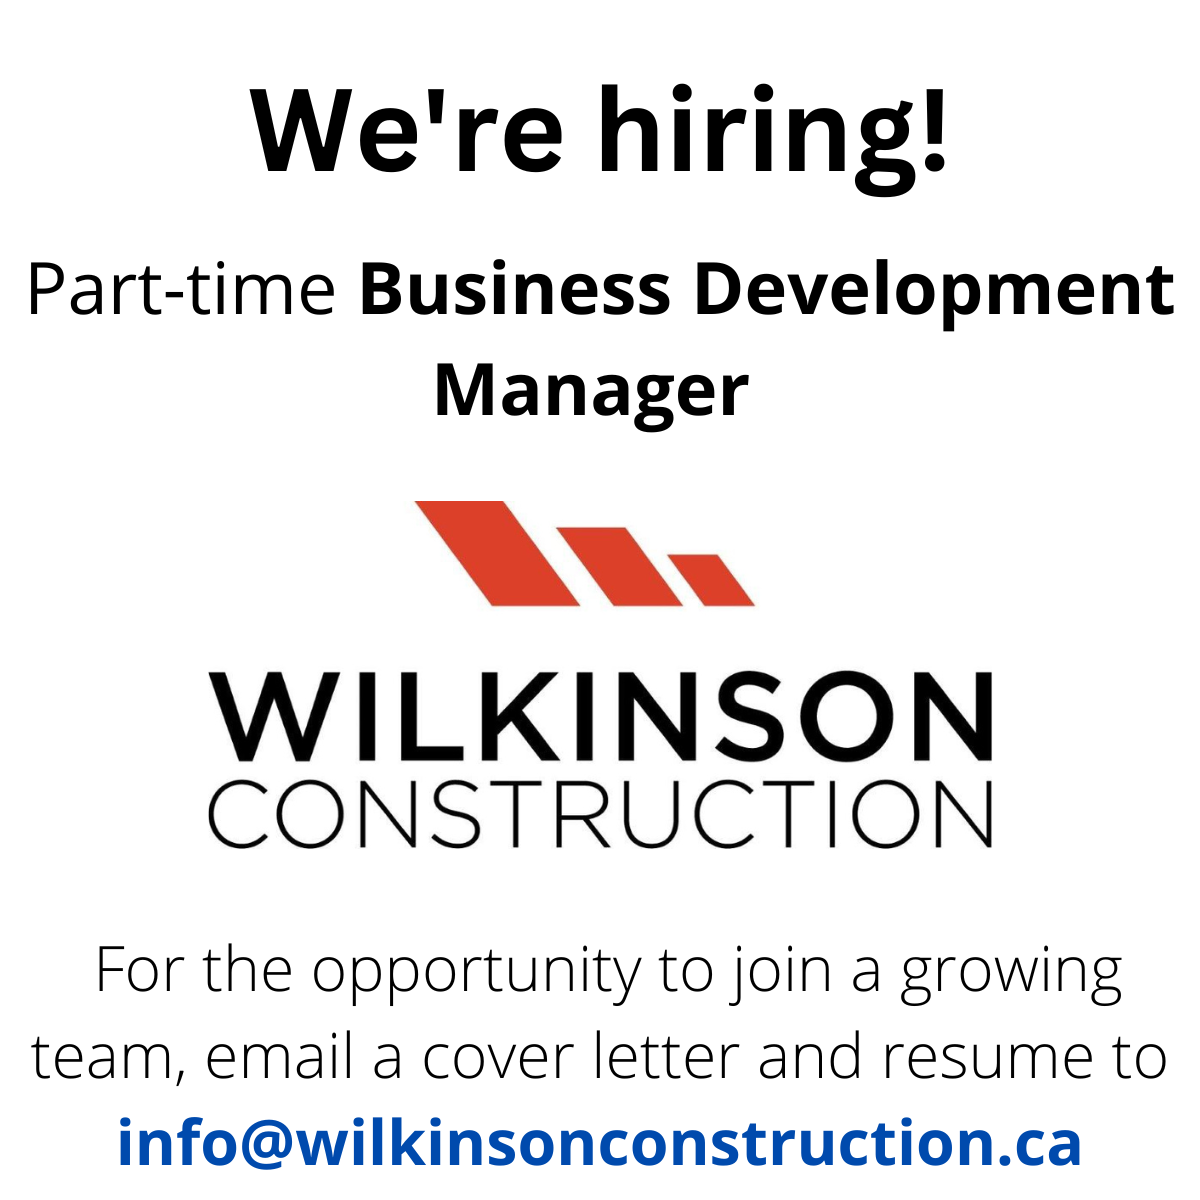 Post with Wilkinson Construction logo and a "we're hiring" a business development manager message